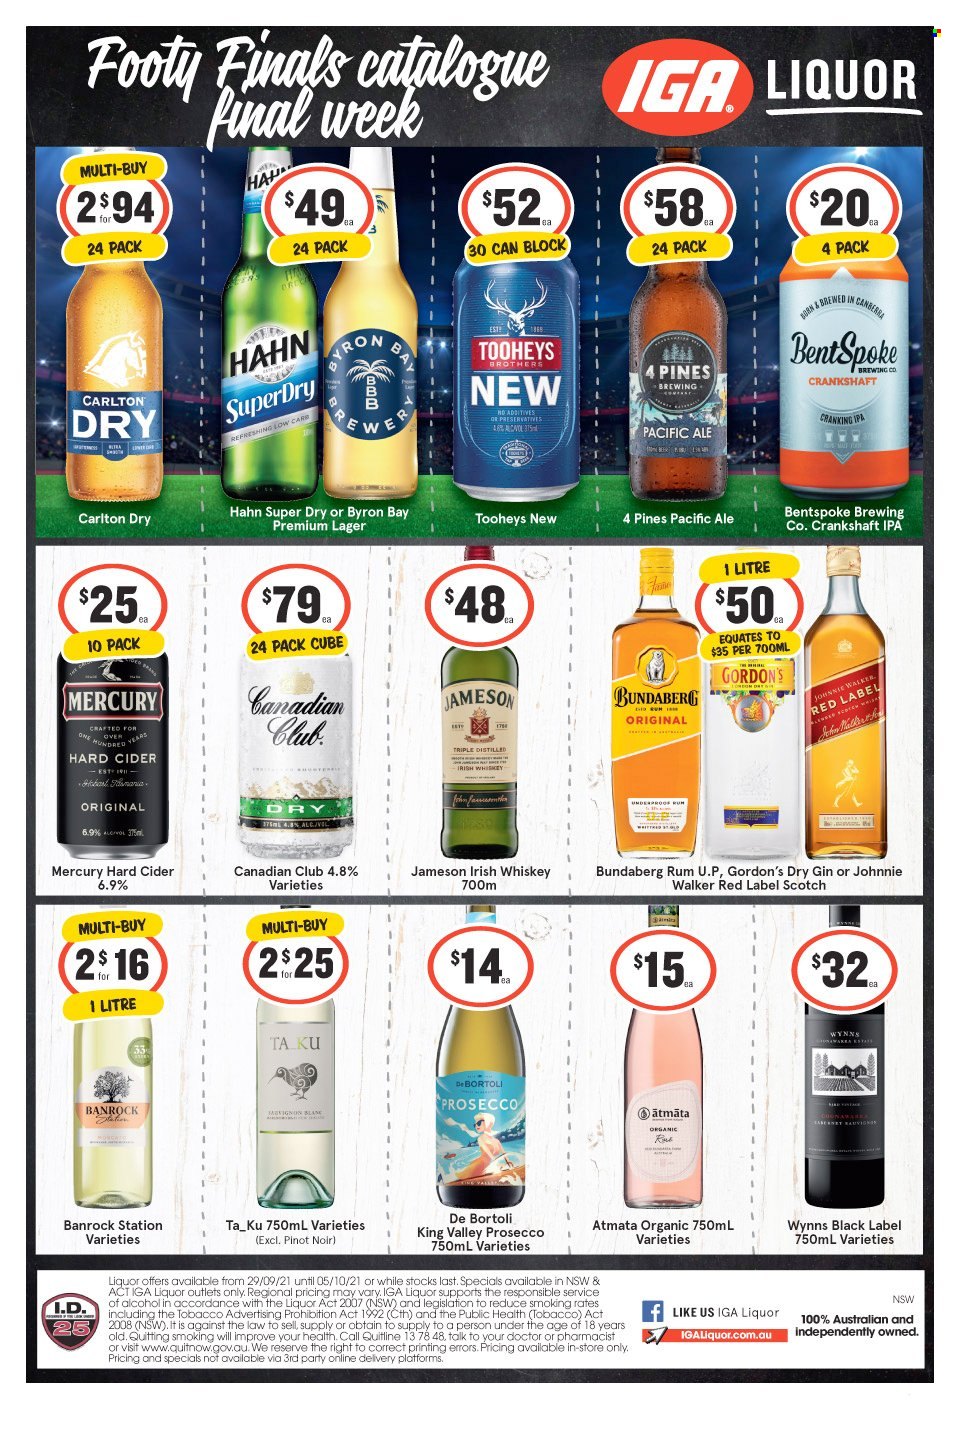 thumbnail - IGA LIQUOR Catalogue - 29 Sep 2021 - 5 Oct 2021 - Sales products - red wine, prosecco, wine, Pinot Noir, gin, rum, whiskey, irish whiskey, Jameson, liquor, Johnnie Walker, Gordon's, Ron Pelicano, Bundaberg, BROTHERS, whisky, cider, beer, Lager, IPA, Hahn, pacific ale. Page 1.